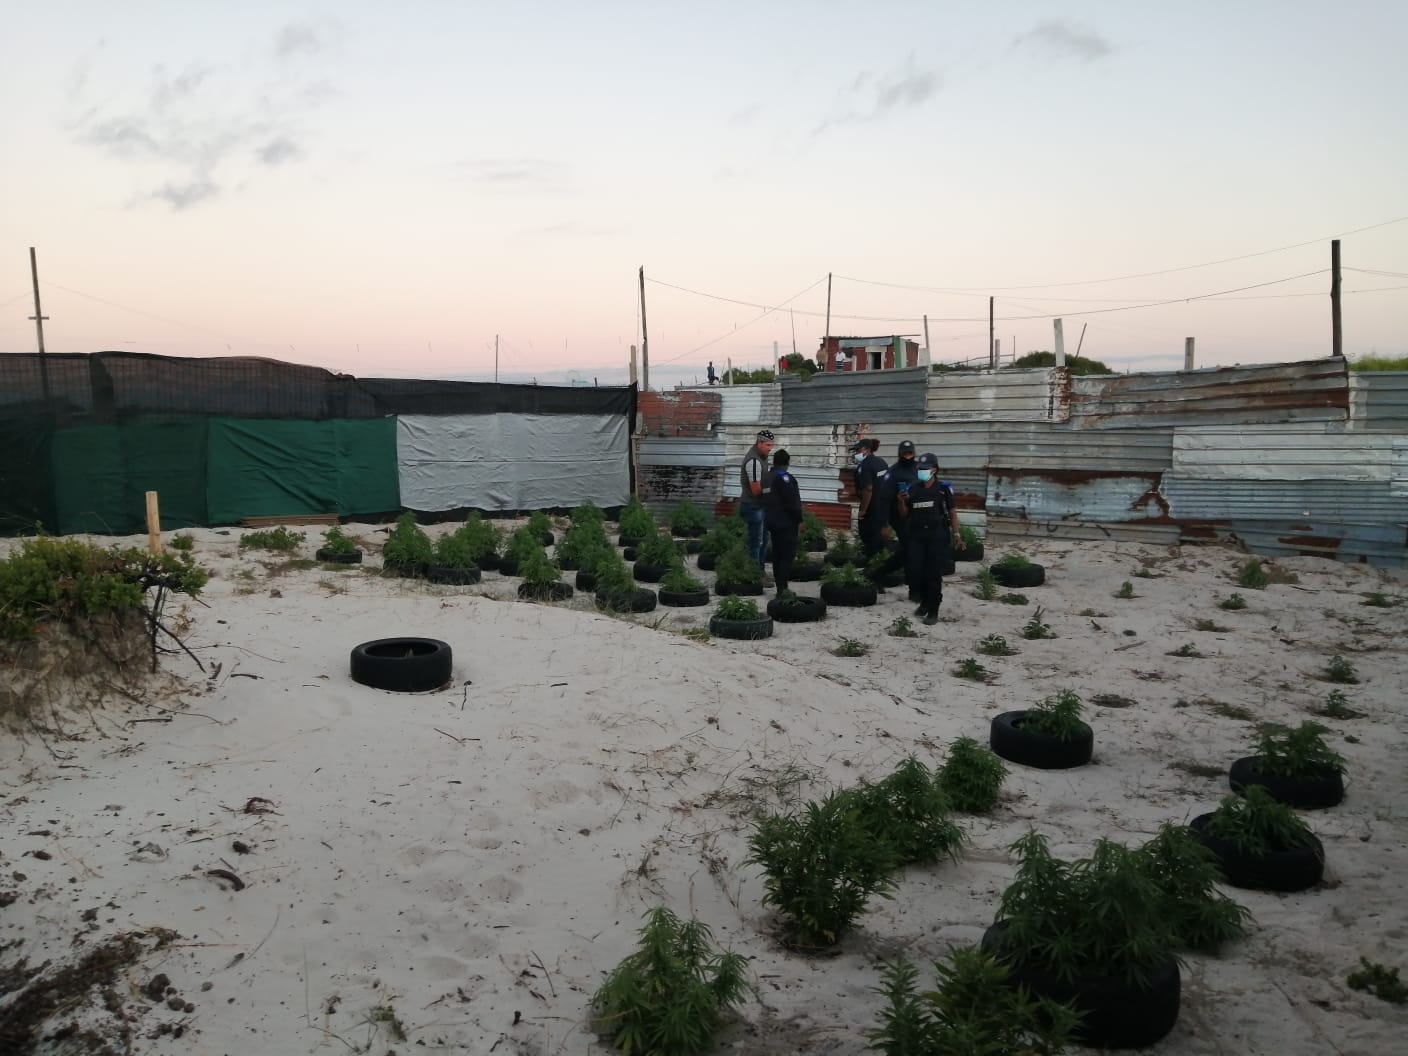 Integrated operation lands suspect behind bars for cultivating dagga